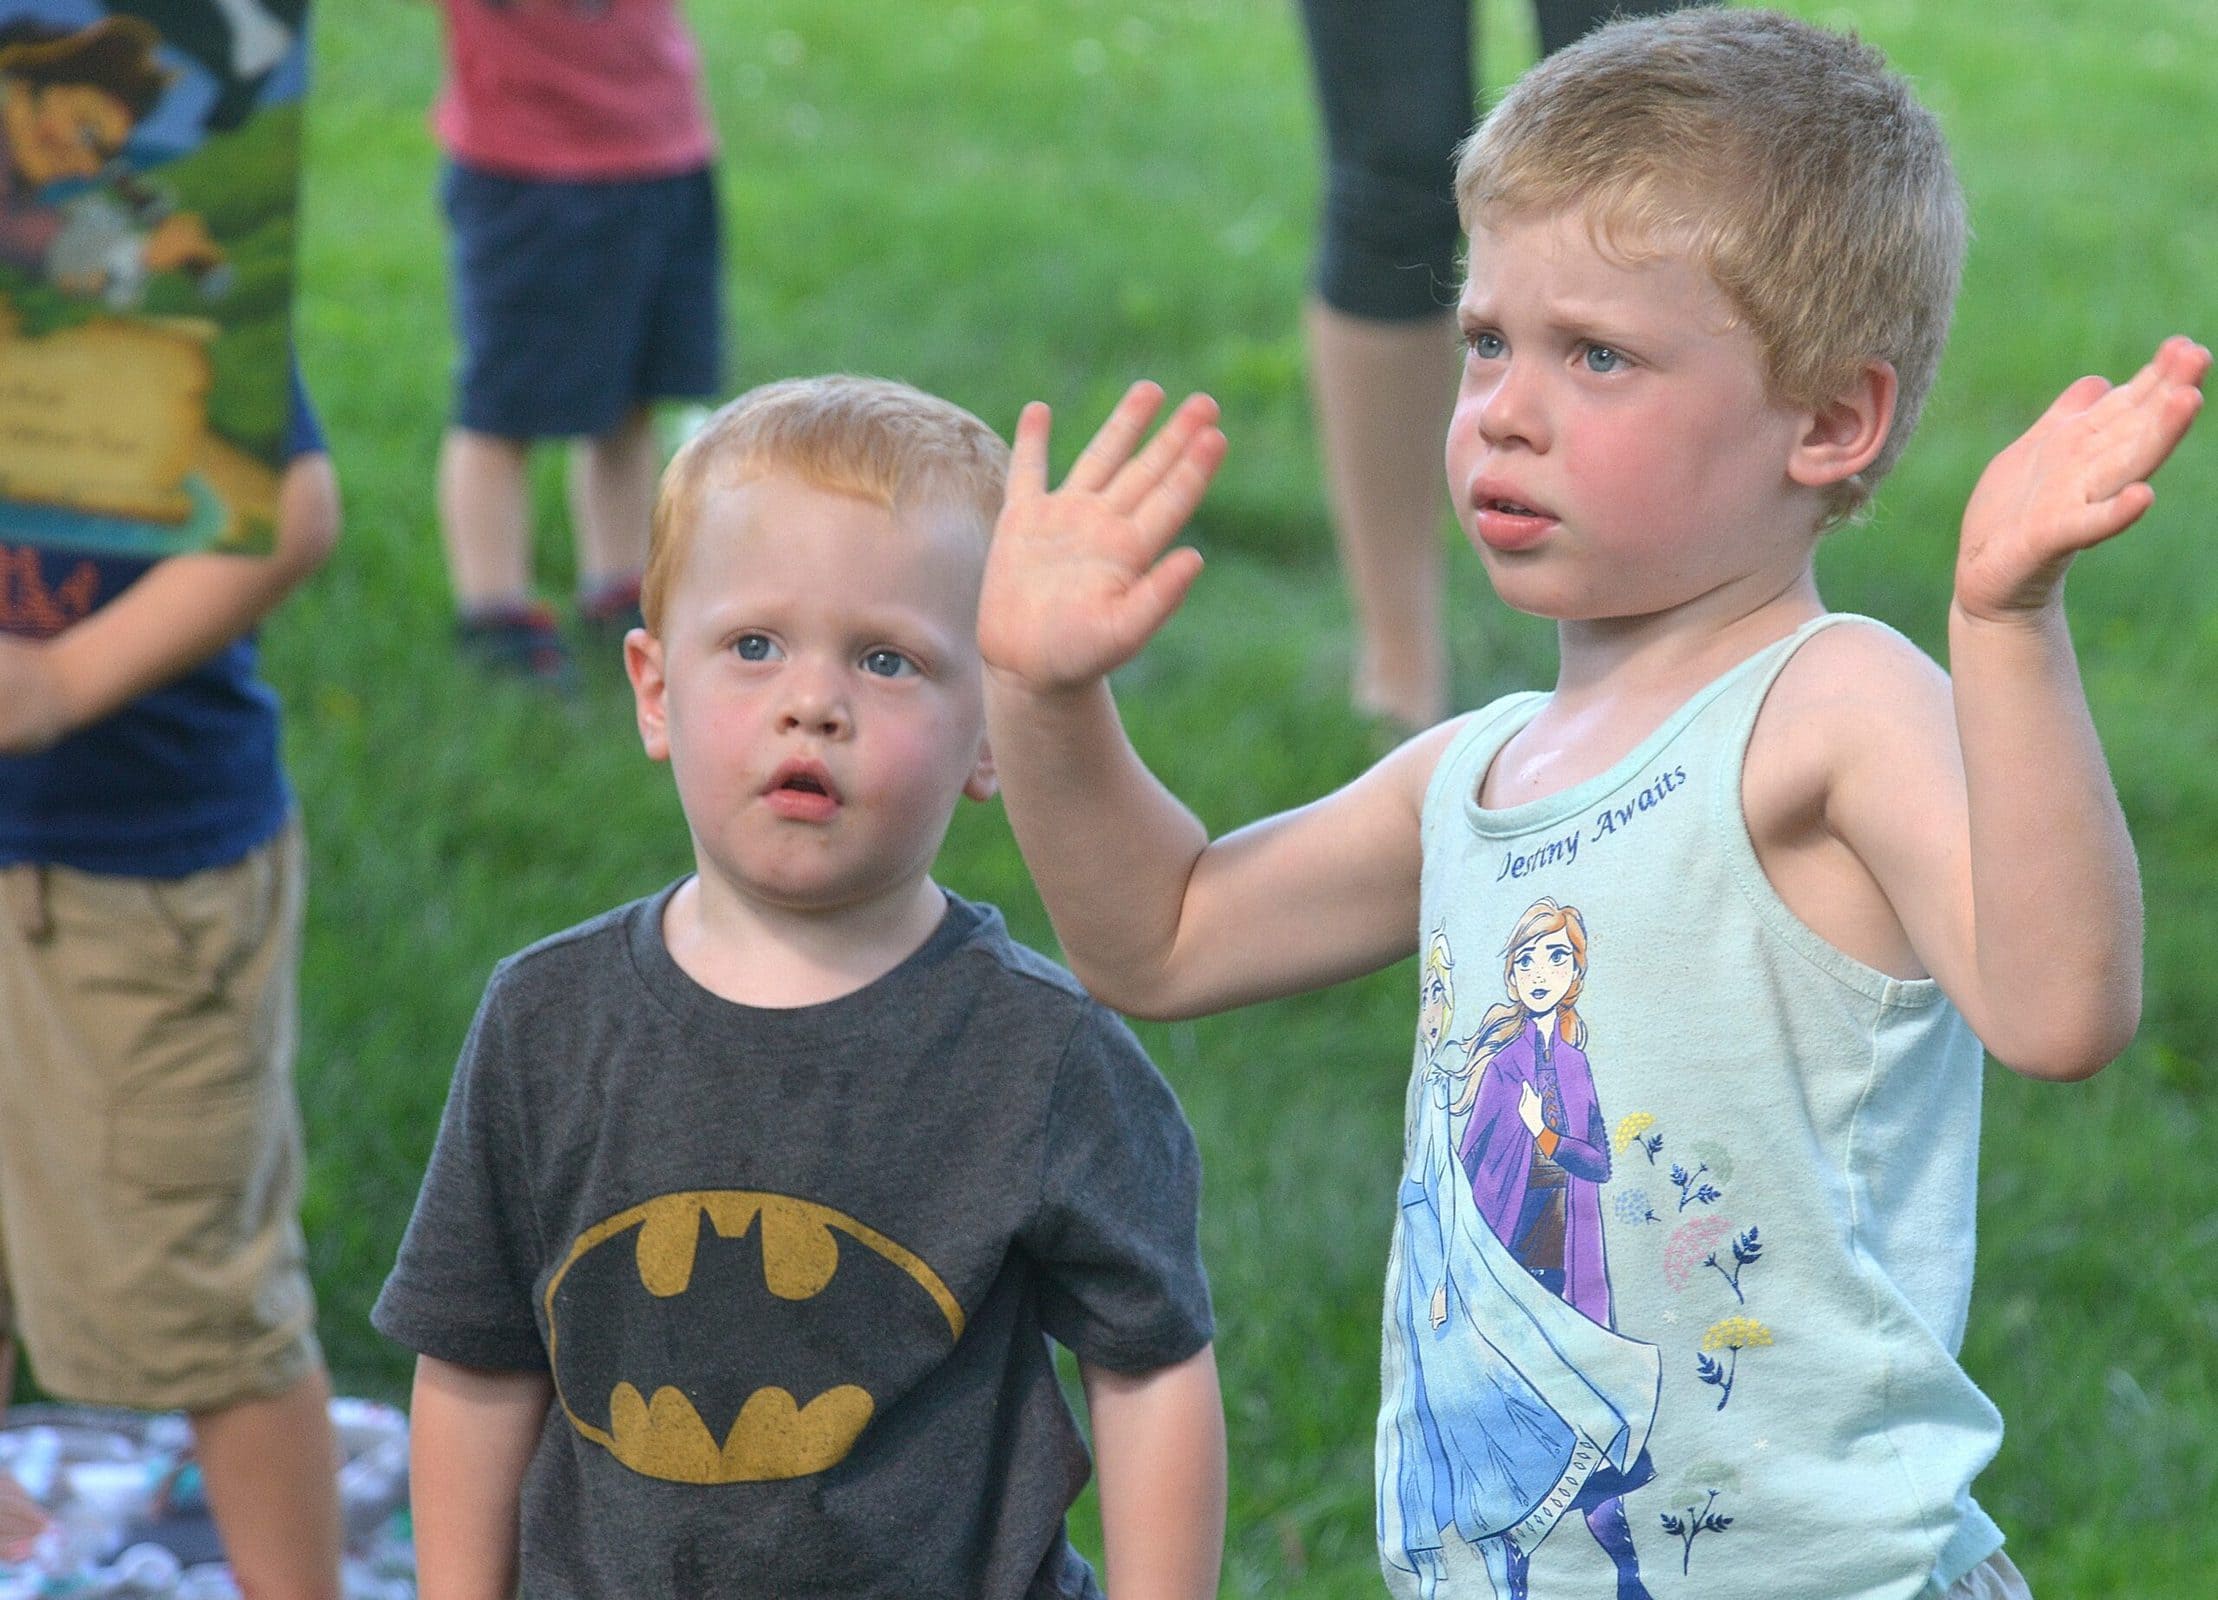 Southborough Library hosts kids’ summer events outdoors